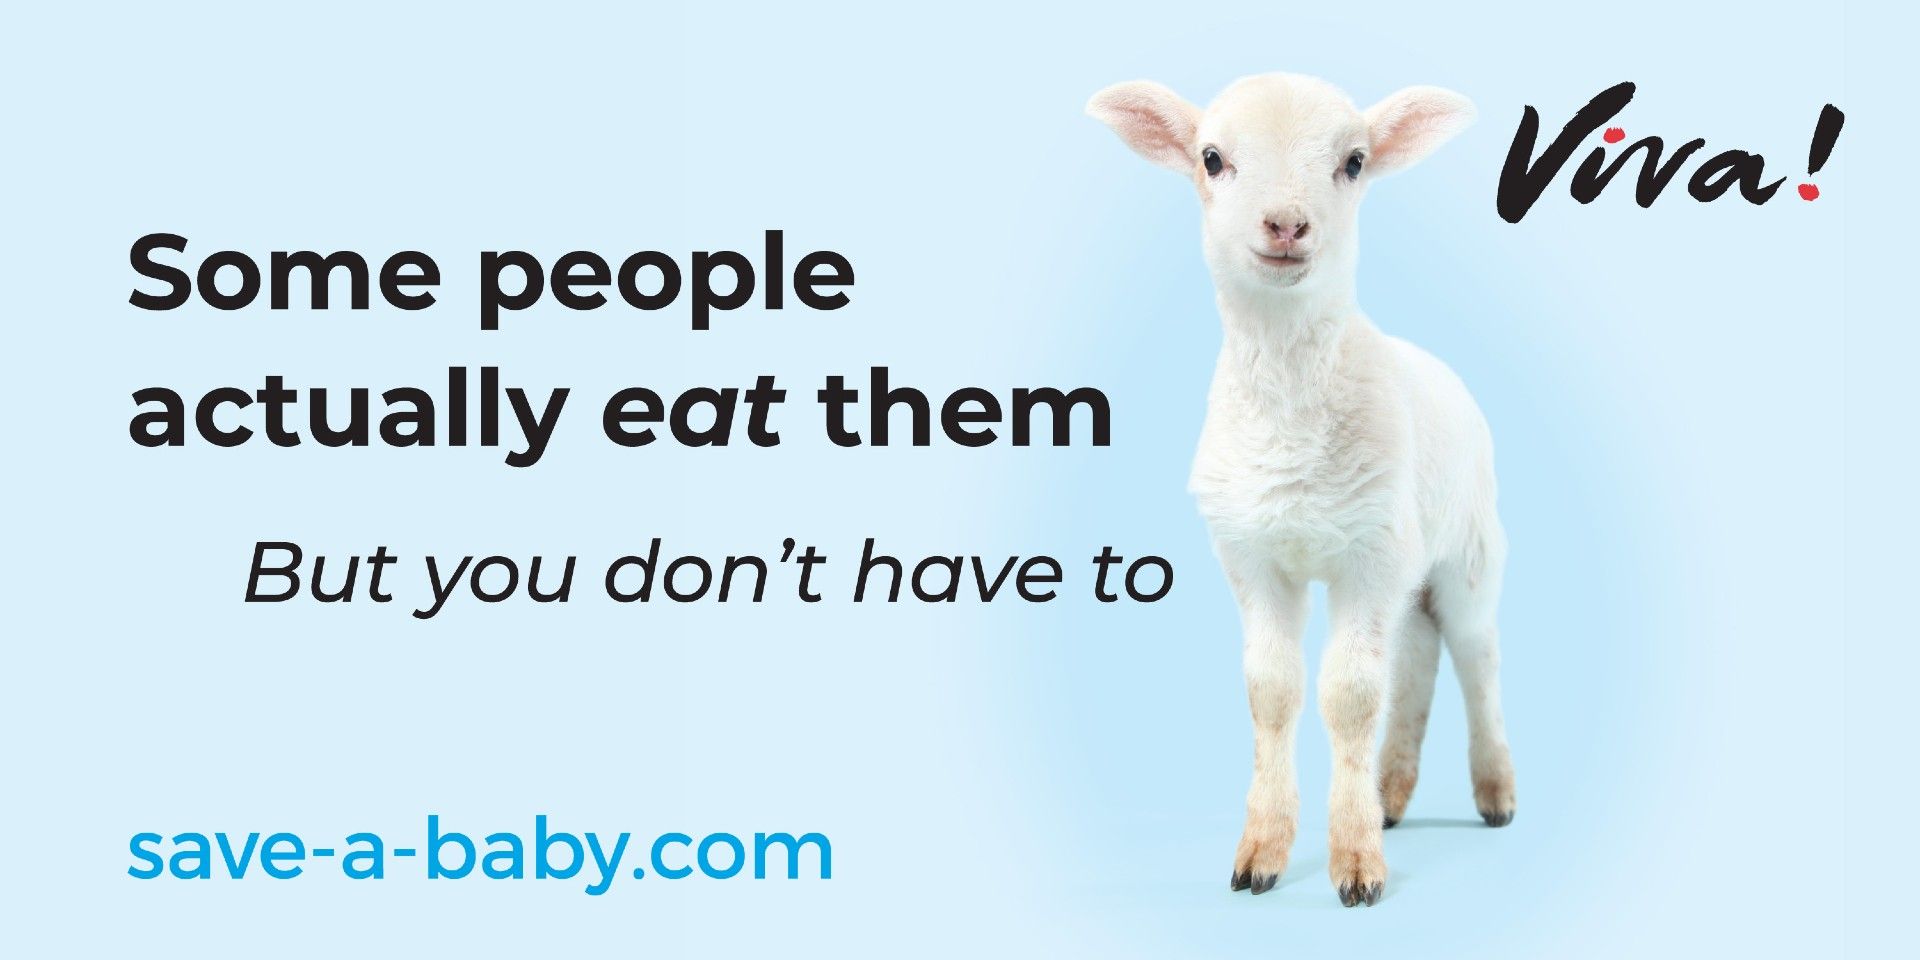 billboard design of lamb with text saying some people actually eat them, but you don't have to